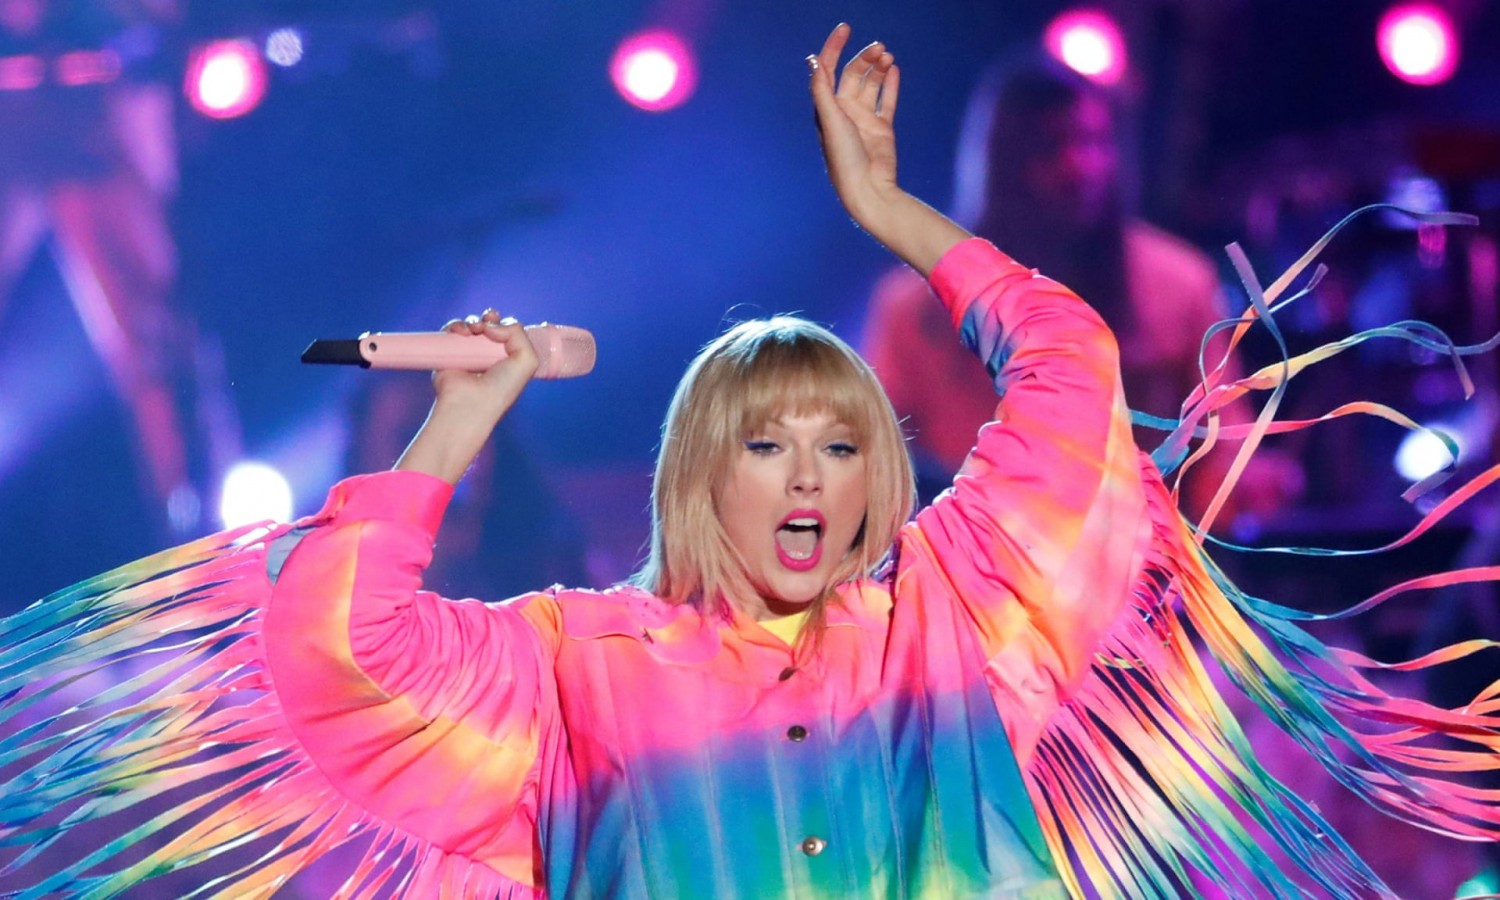 Taylor Swift’s new song The Archer will be track five on her upcoming album Lover. That slot on Swift’s LPs is traditionally given to the song with the most ‘honest, emotional, vulnerable’ lyrics. Photograph: Mario Anzuoni/Reuters